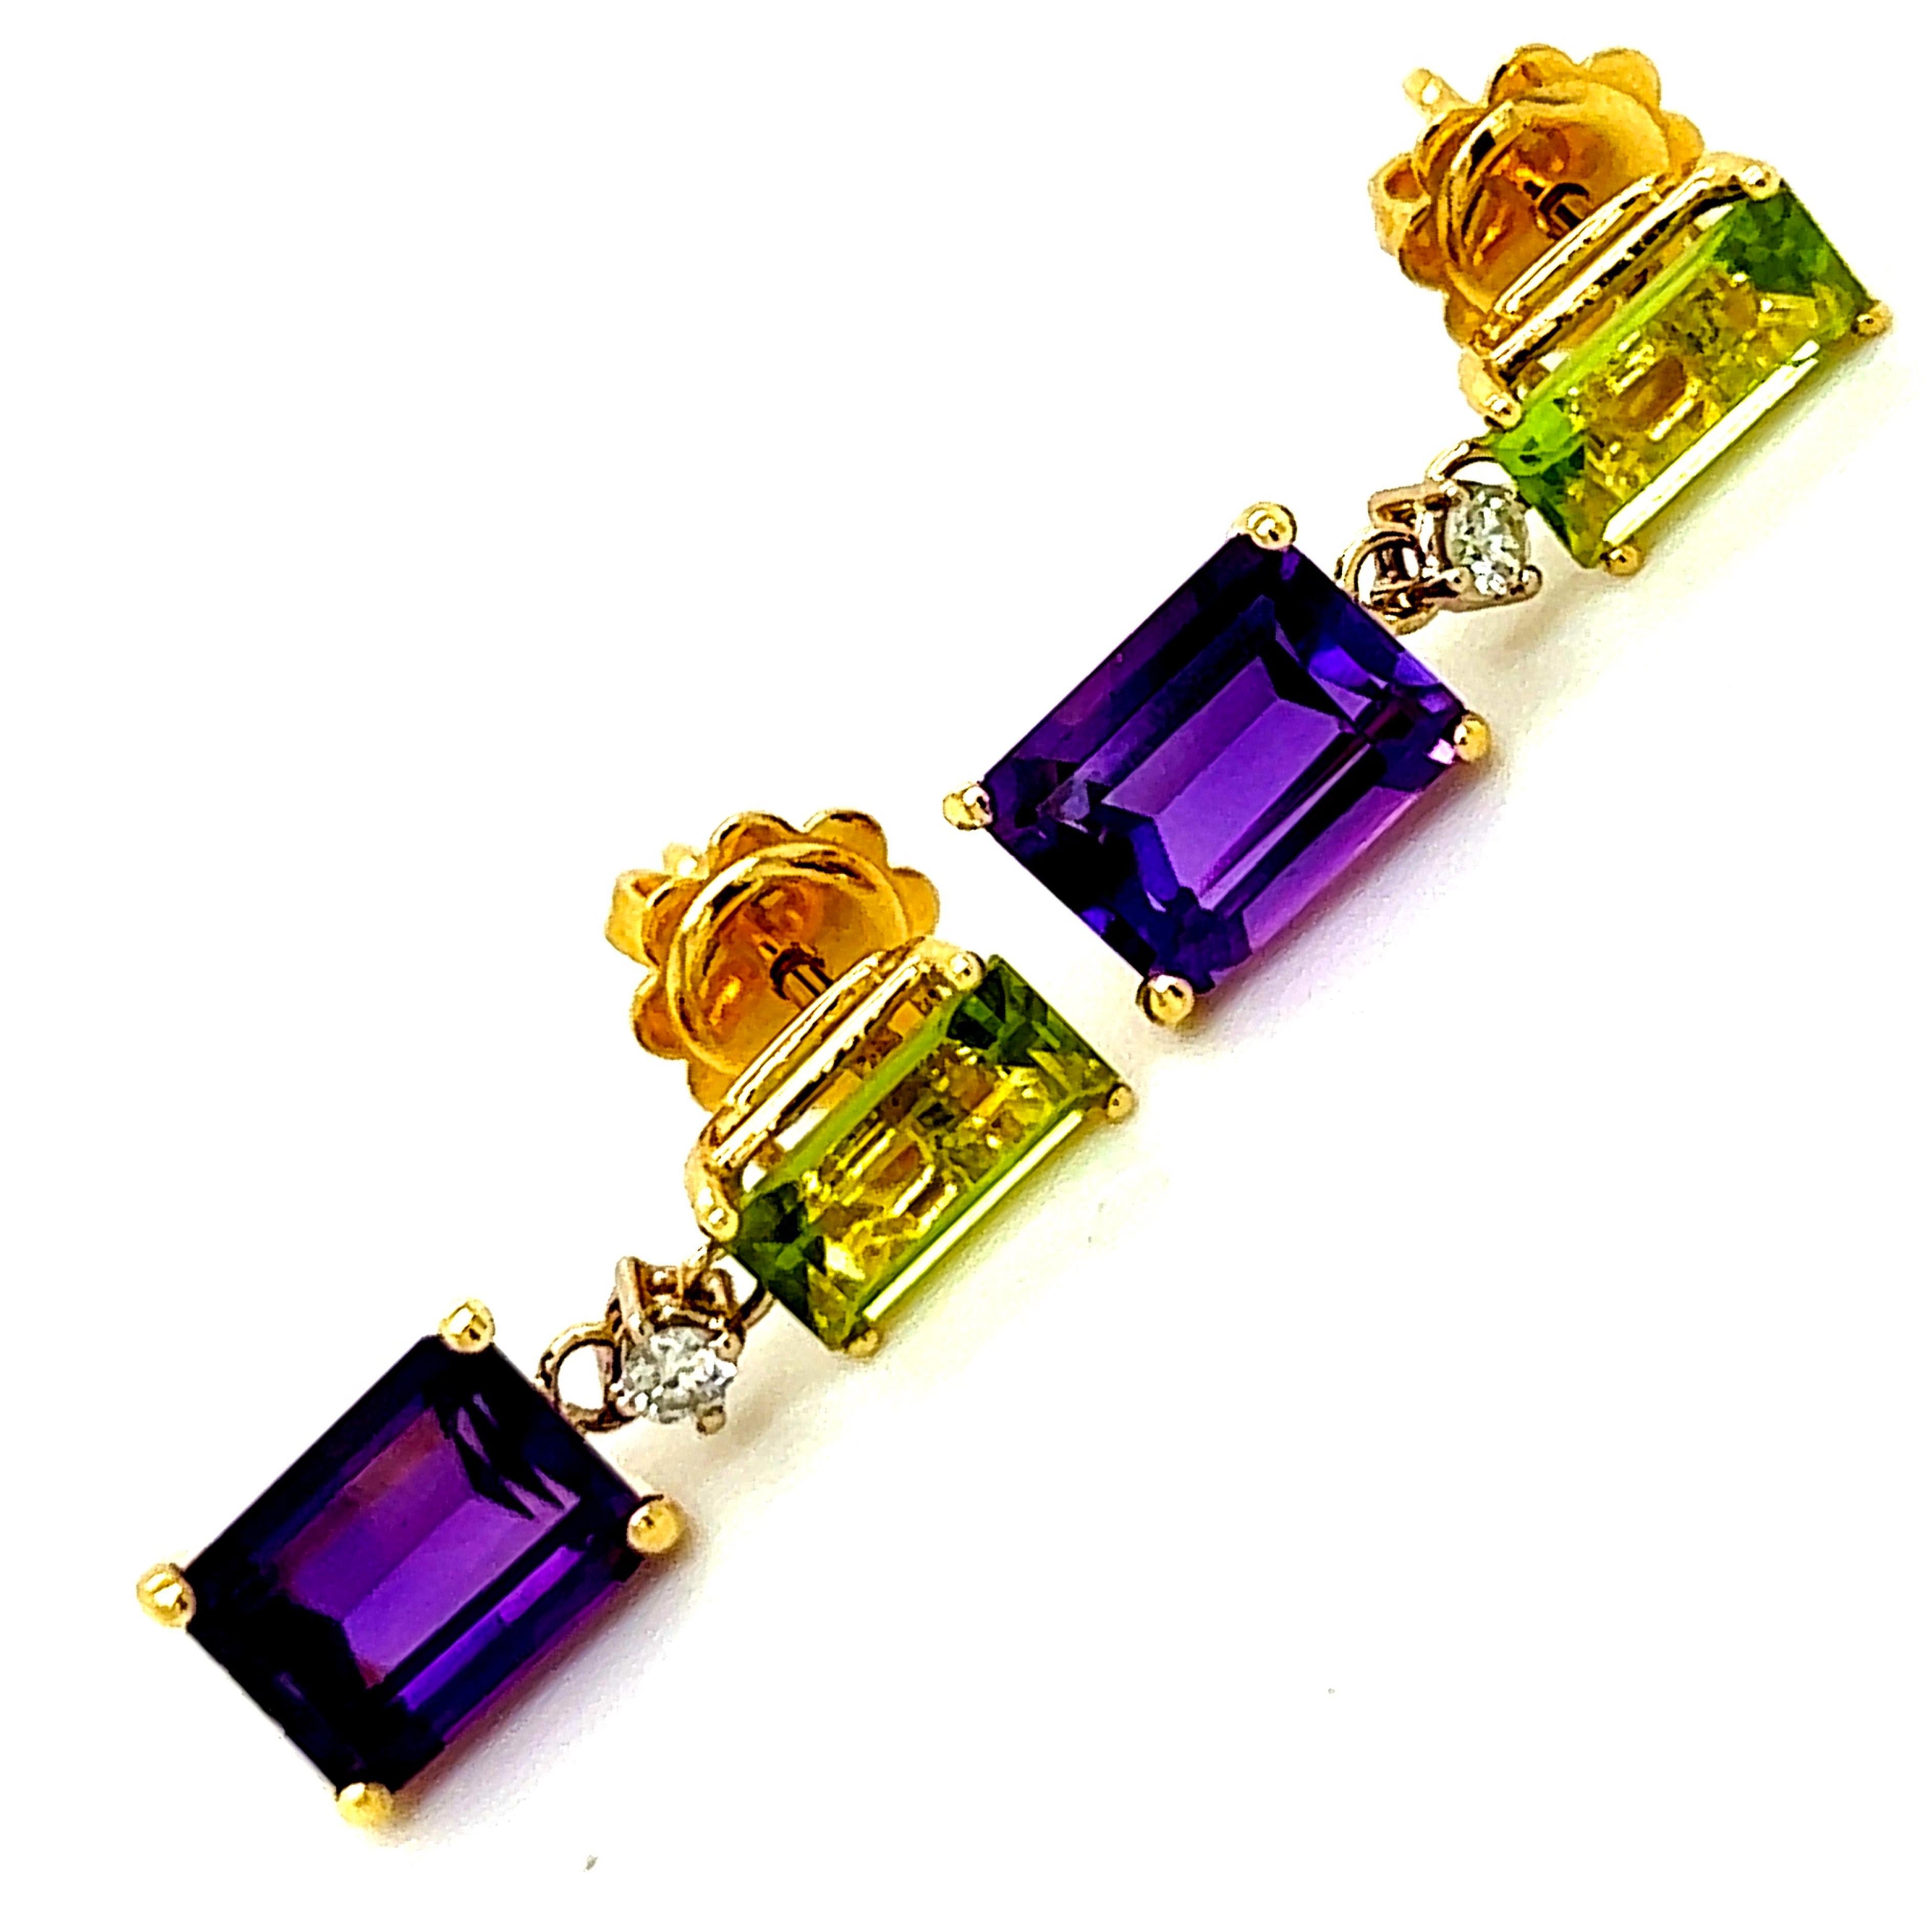 Chic yet timeless  3.40Kt Natural Peridot and 1.70Kt Amethyst Emerald Cut in a 0.10Kt  White Diamond 18KT Carat Yellow Gold Setting.
These top quality stones were carefully hand inlaid in Germany.
In our smart fitted suede leather case and